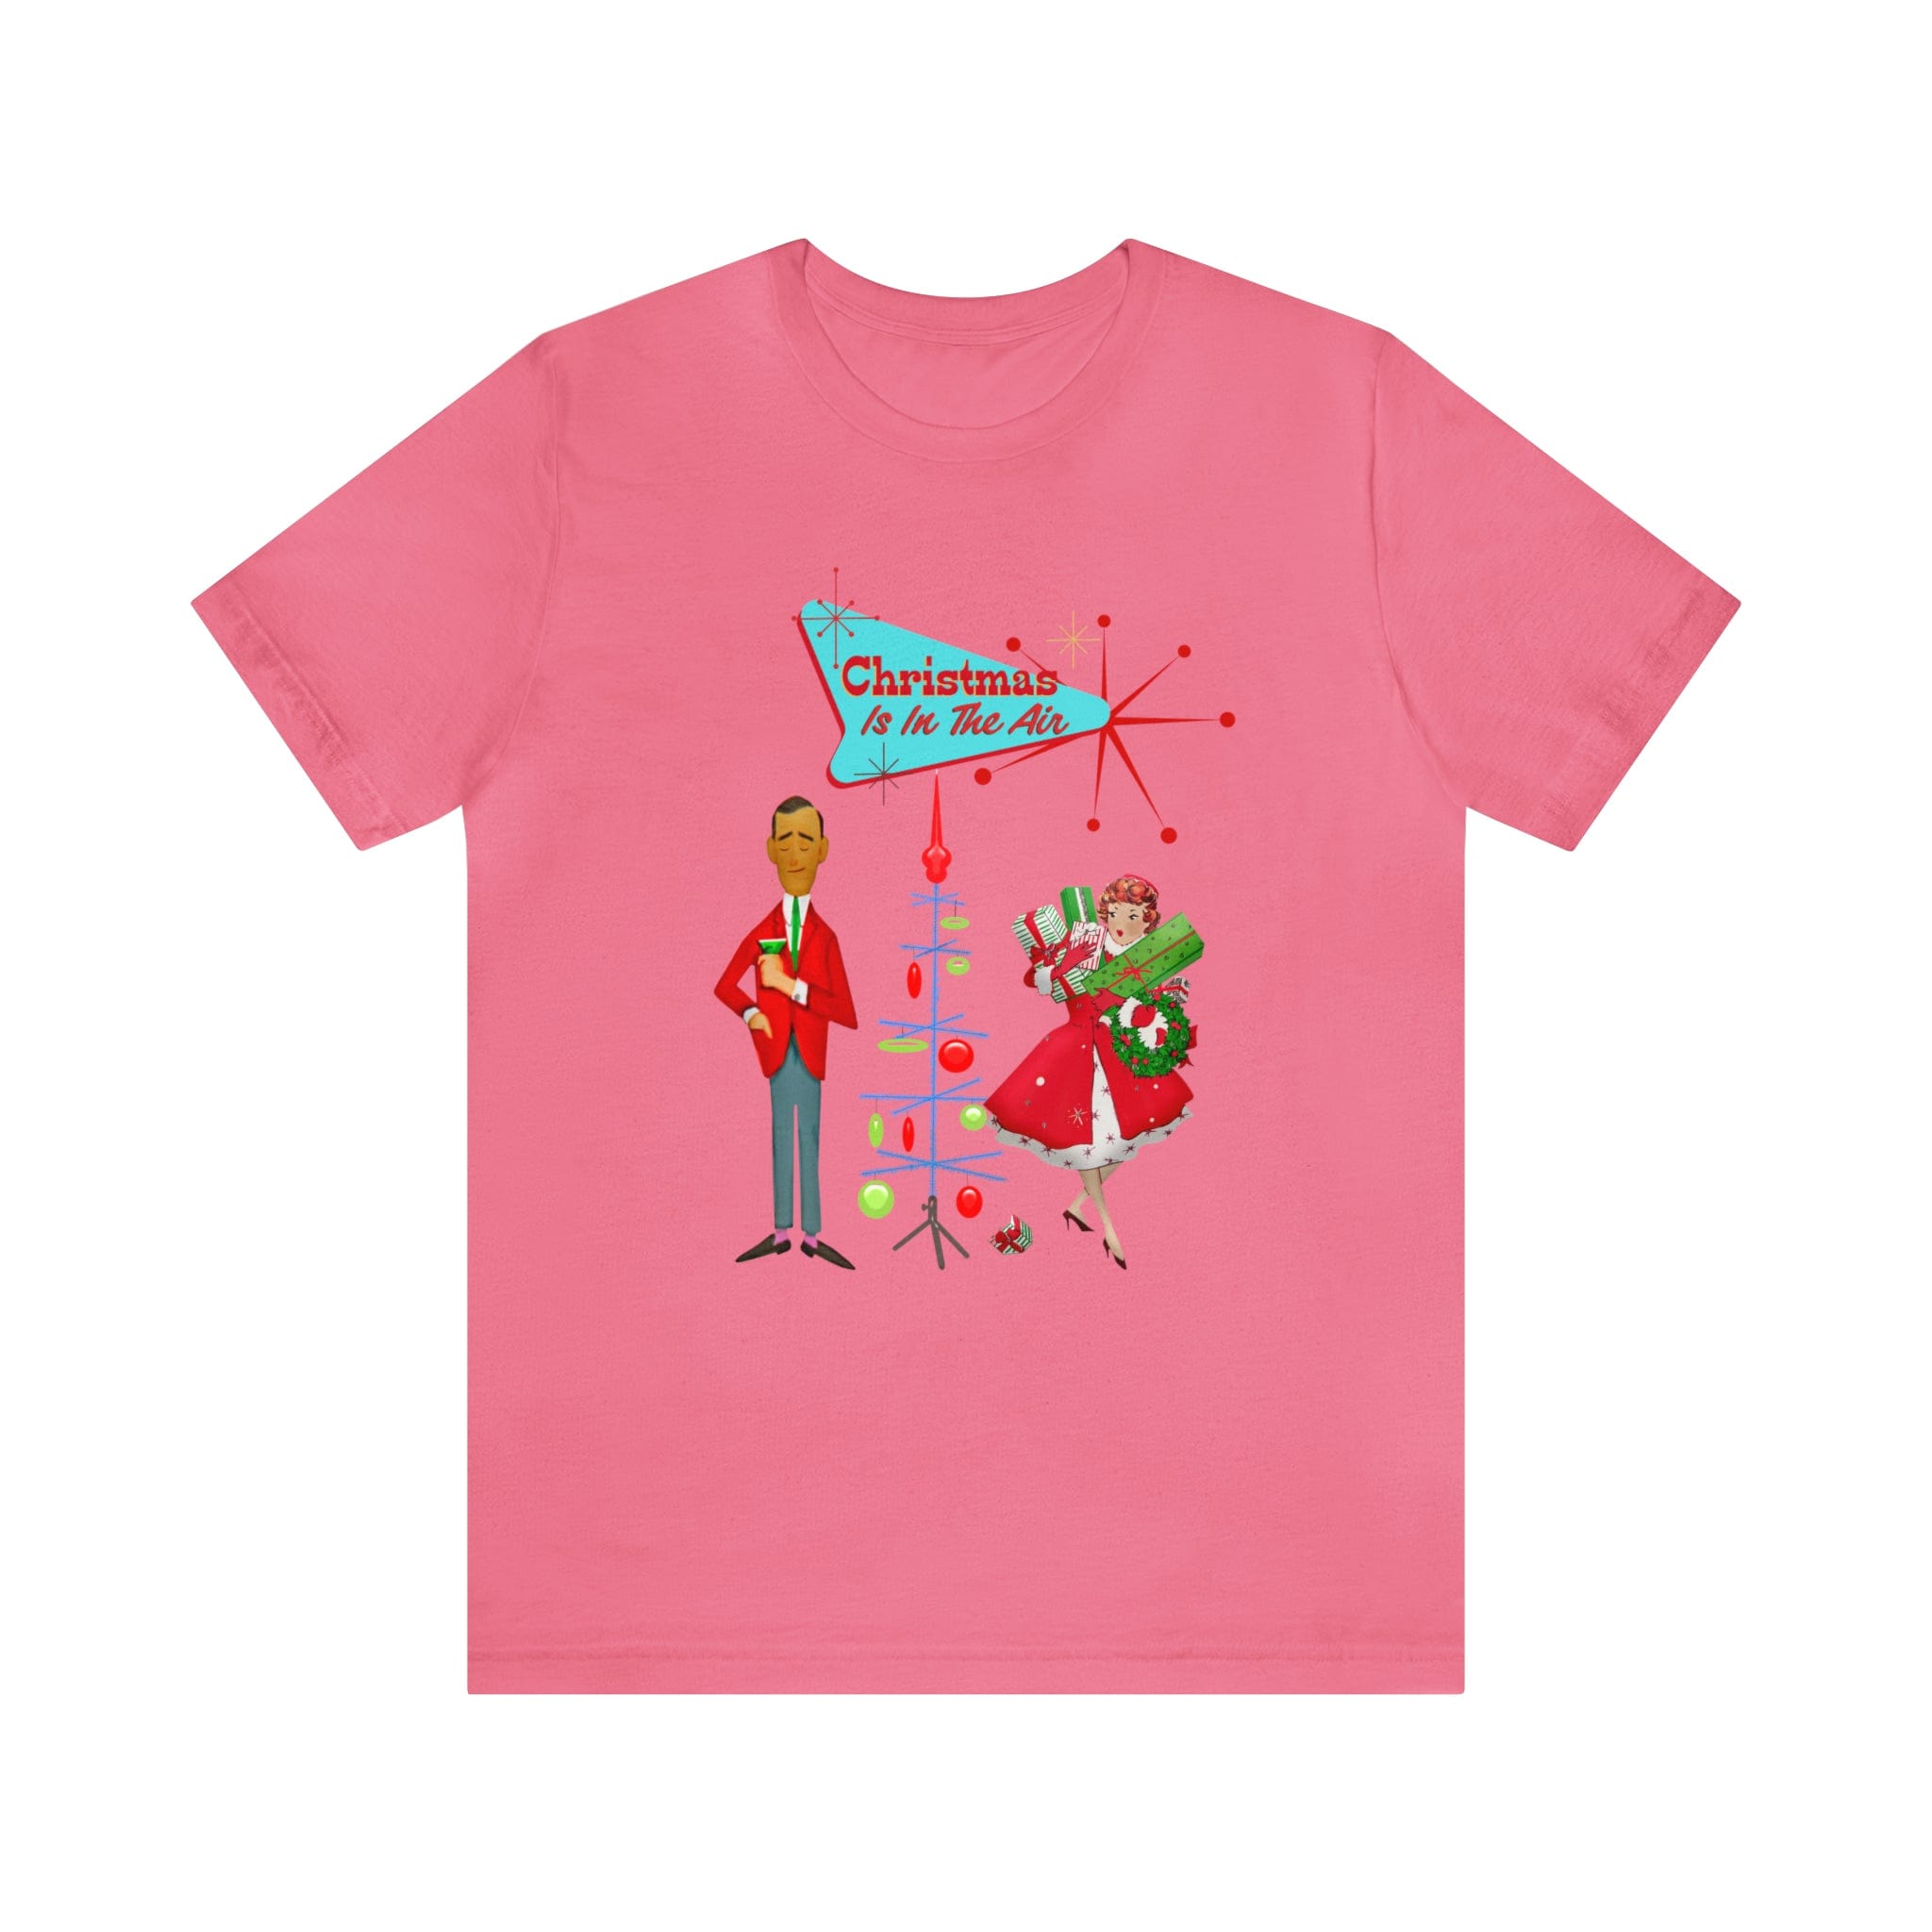 Retro Holiday, Christmas Party, Mid Century Mod, Kitschy Christmas Tee Unisex T-Shirt Charity Pink / S